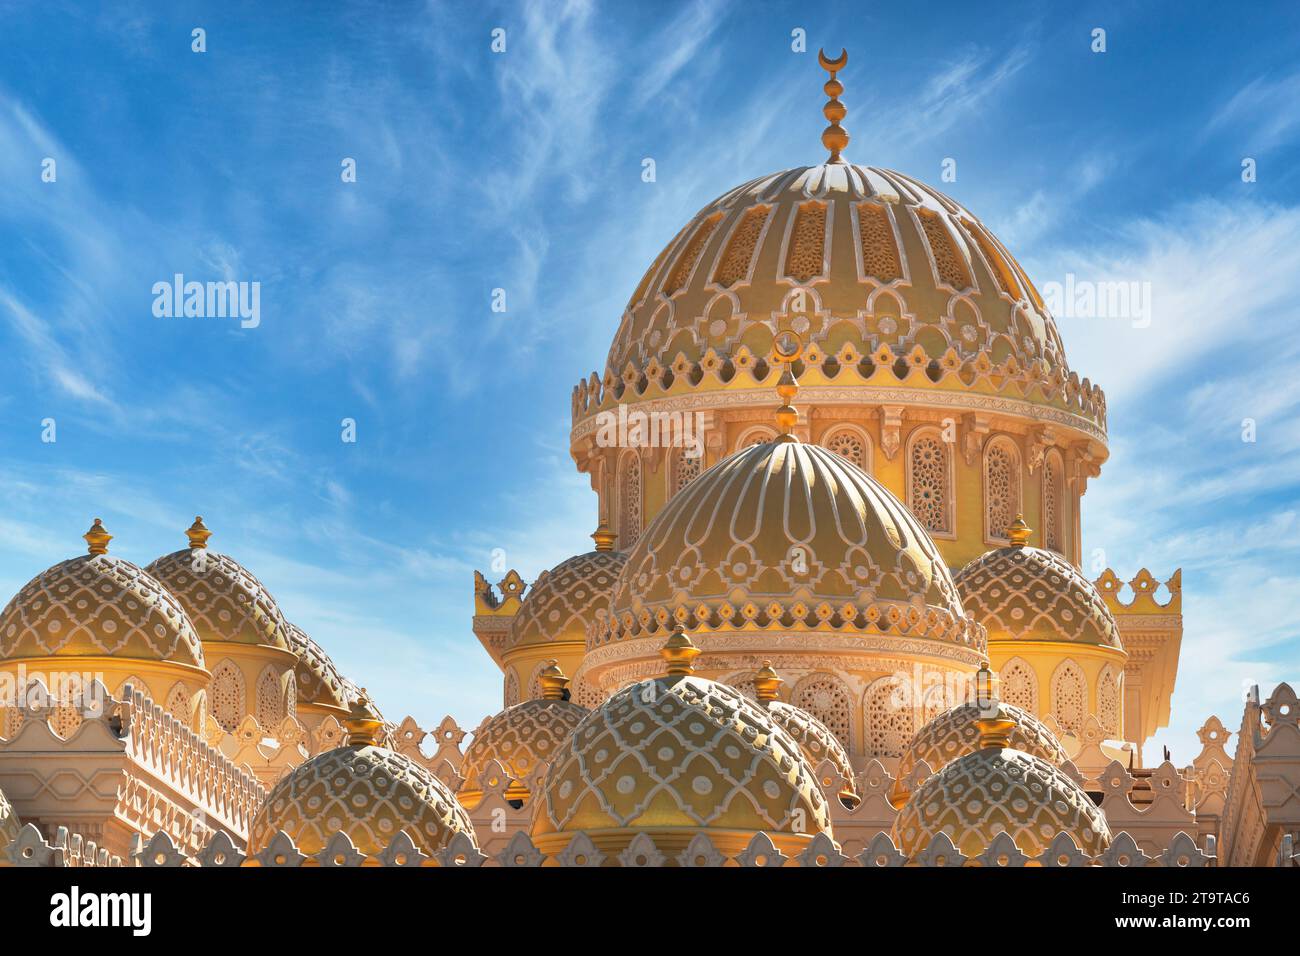 Domes of Al Mina Mosque in Hurghada, Egypt, shining on the background if deep blue sky Stock Photo